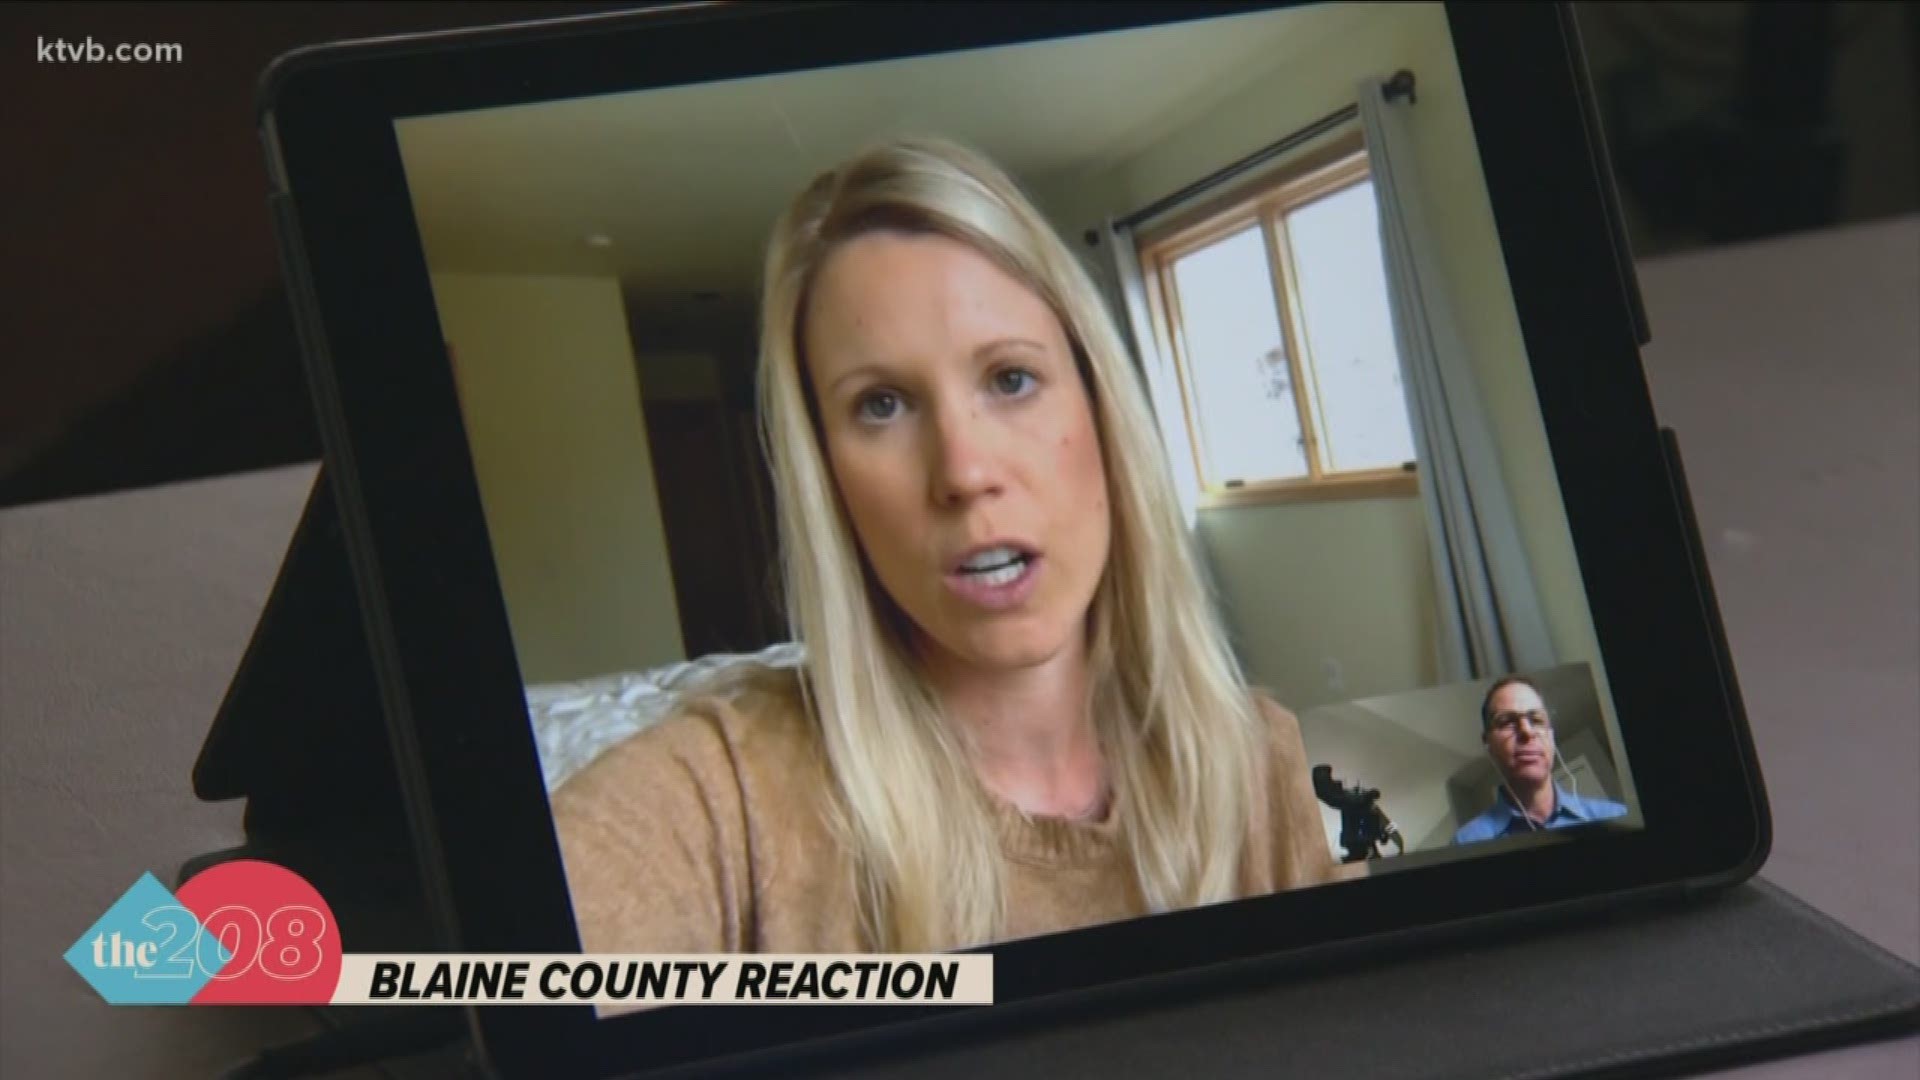 Shannon Camp, who lives in Blaine County with her husband and young daughter, describes how things have changed in the wake of the coronavirus outbreak.